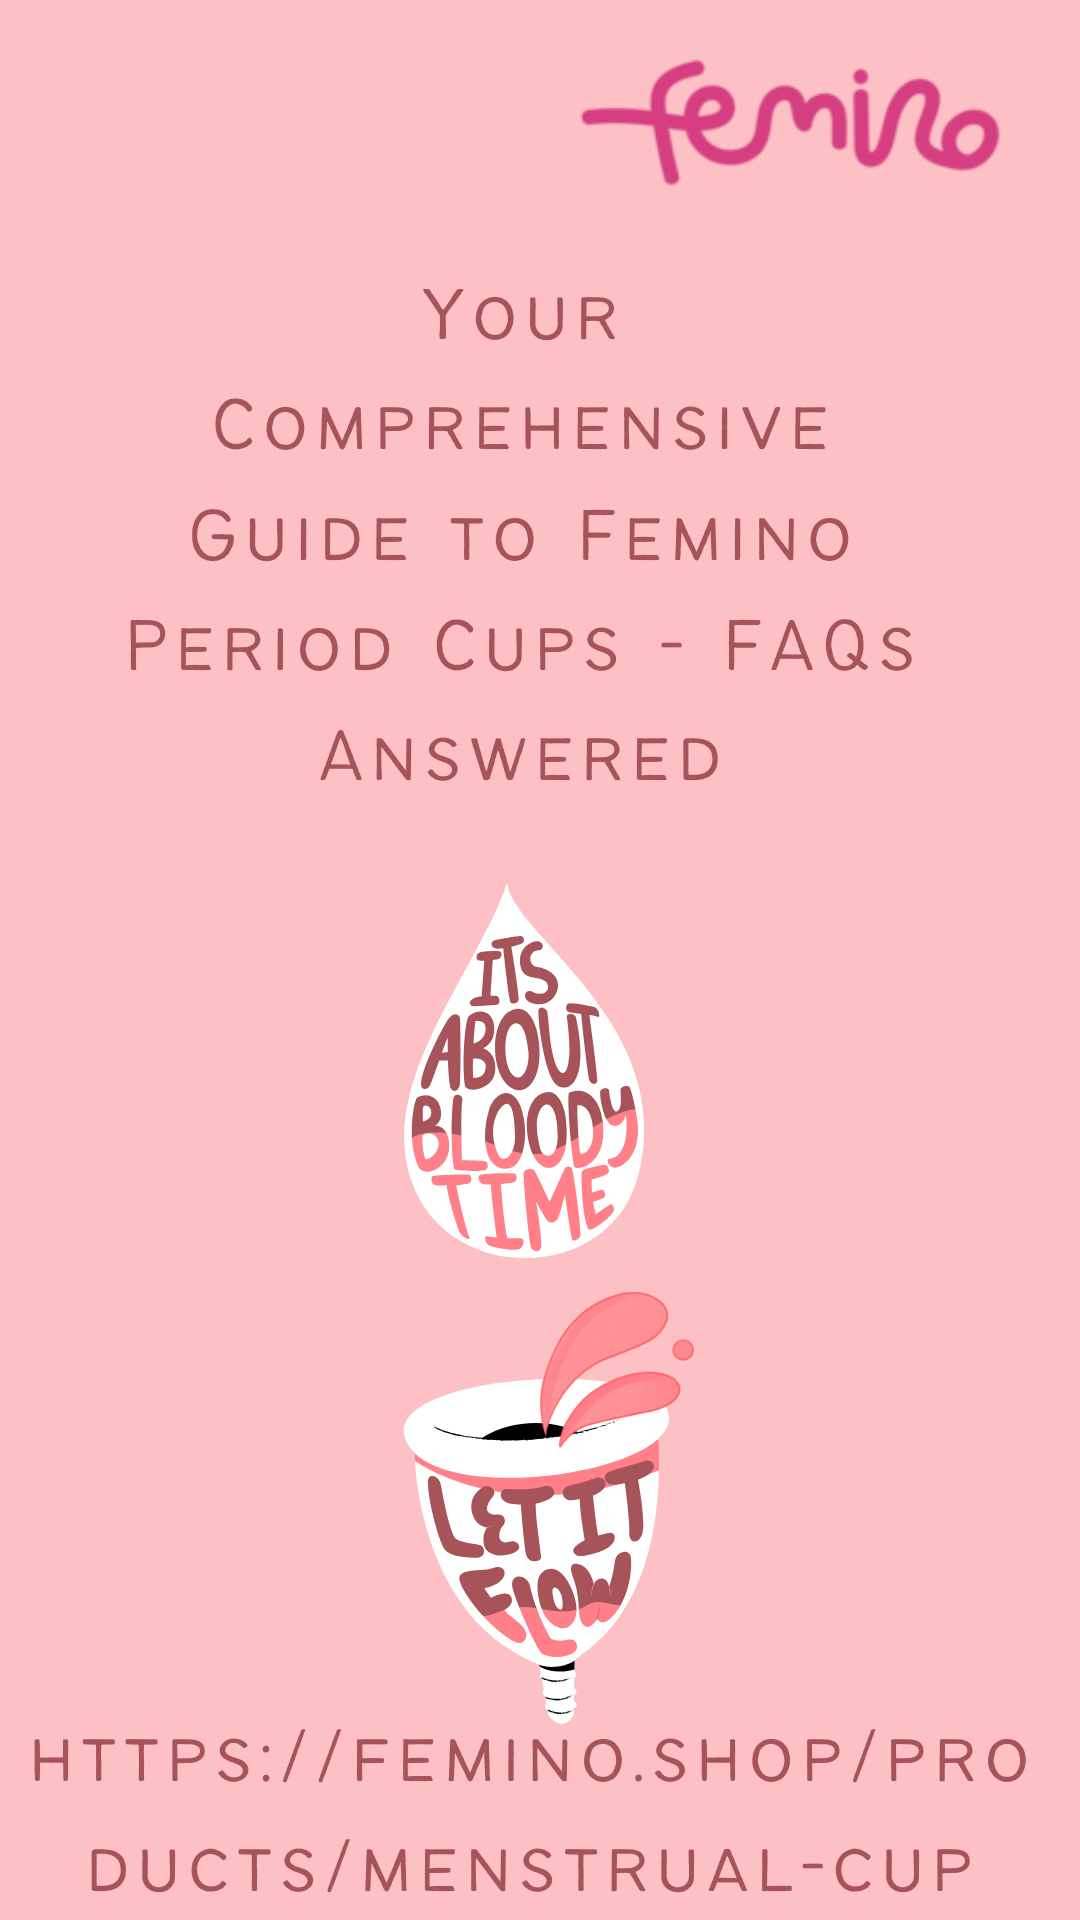 Your Comprehensive Guide to Femino Period Cups - FAQs Answered